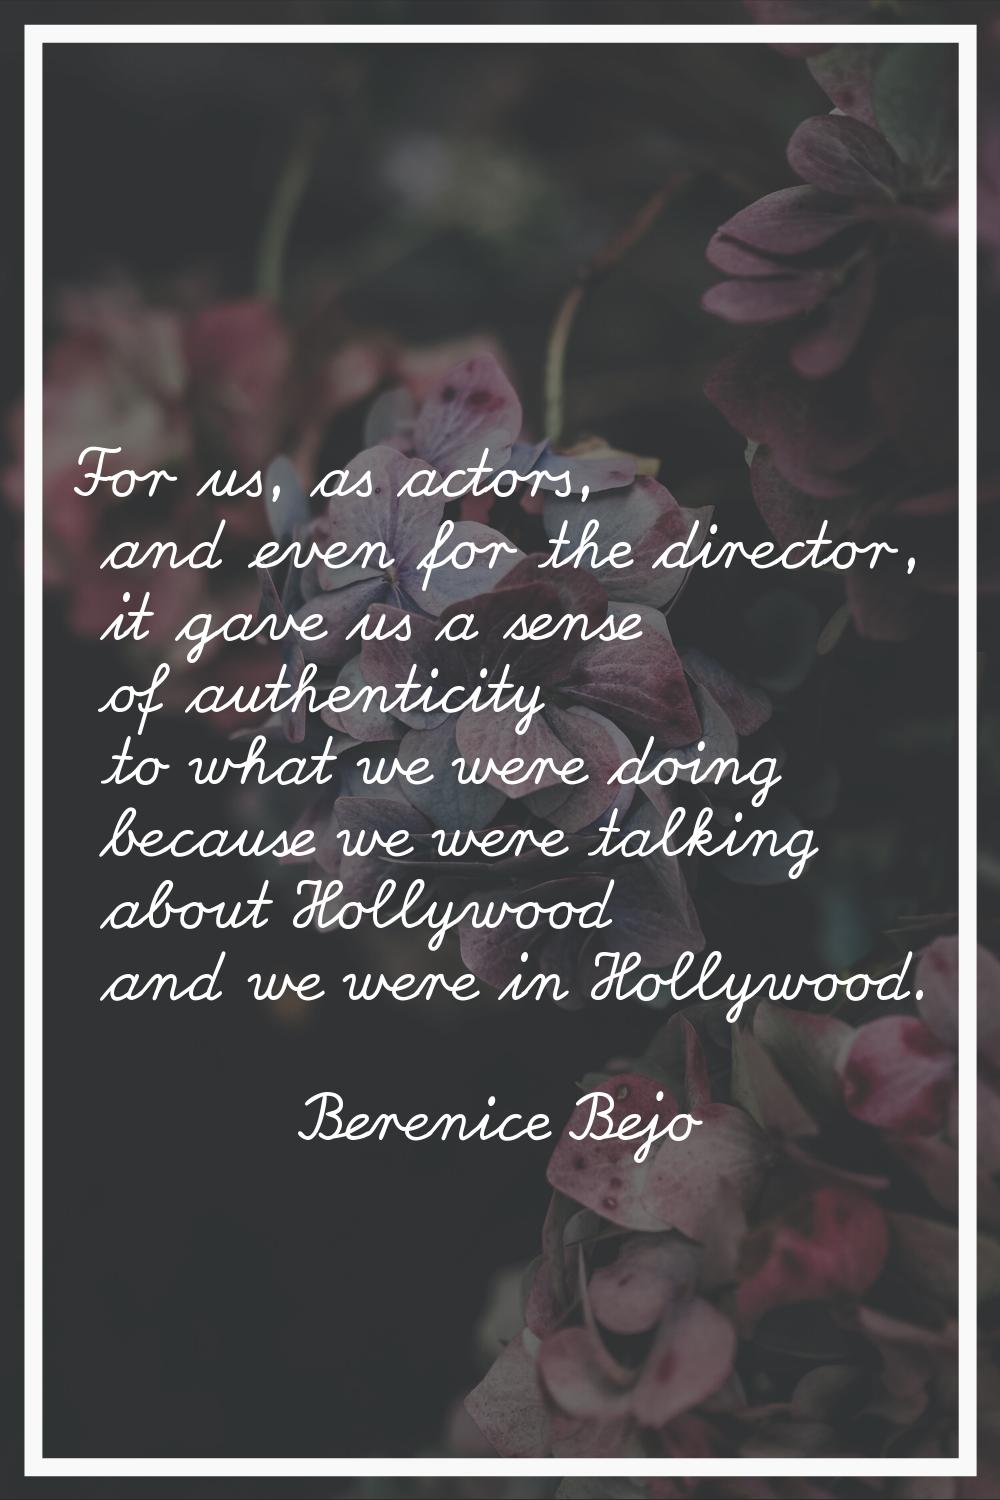 For us, as actors, and even for the director, it gave us a sense of authenticity to what we were do